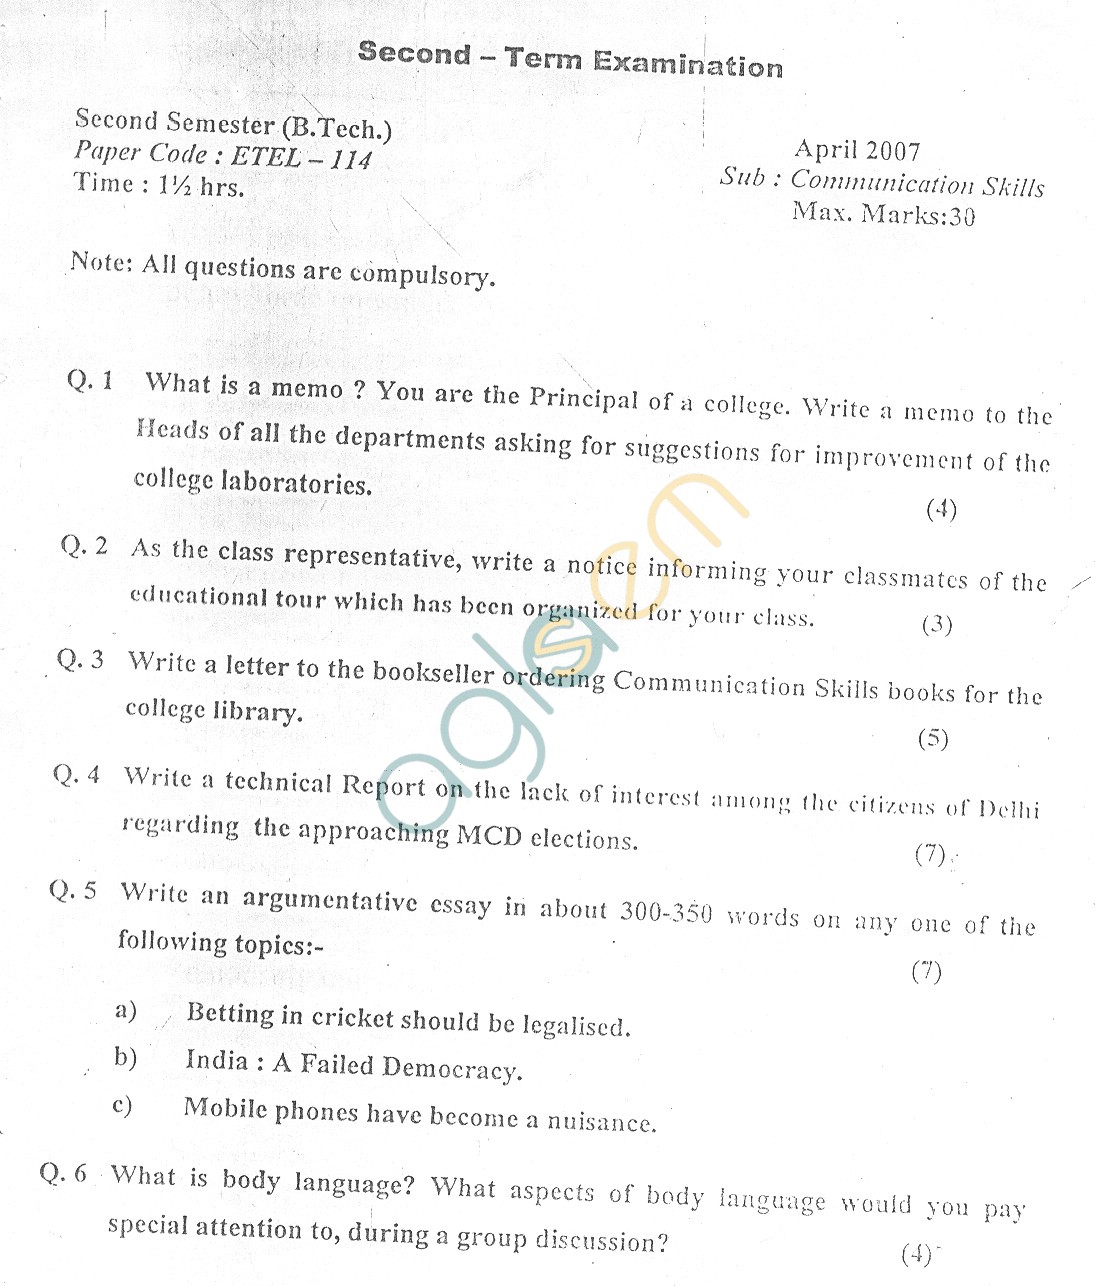 GGSIPU Question Papers Second Semester  Second Term 2007  ETEL-114